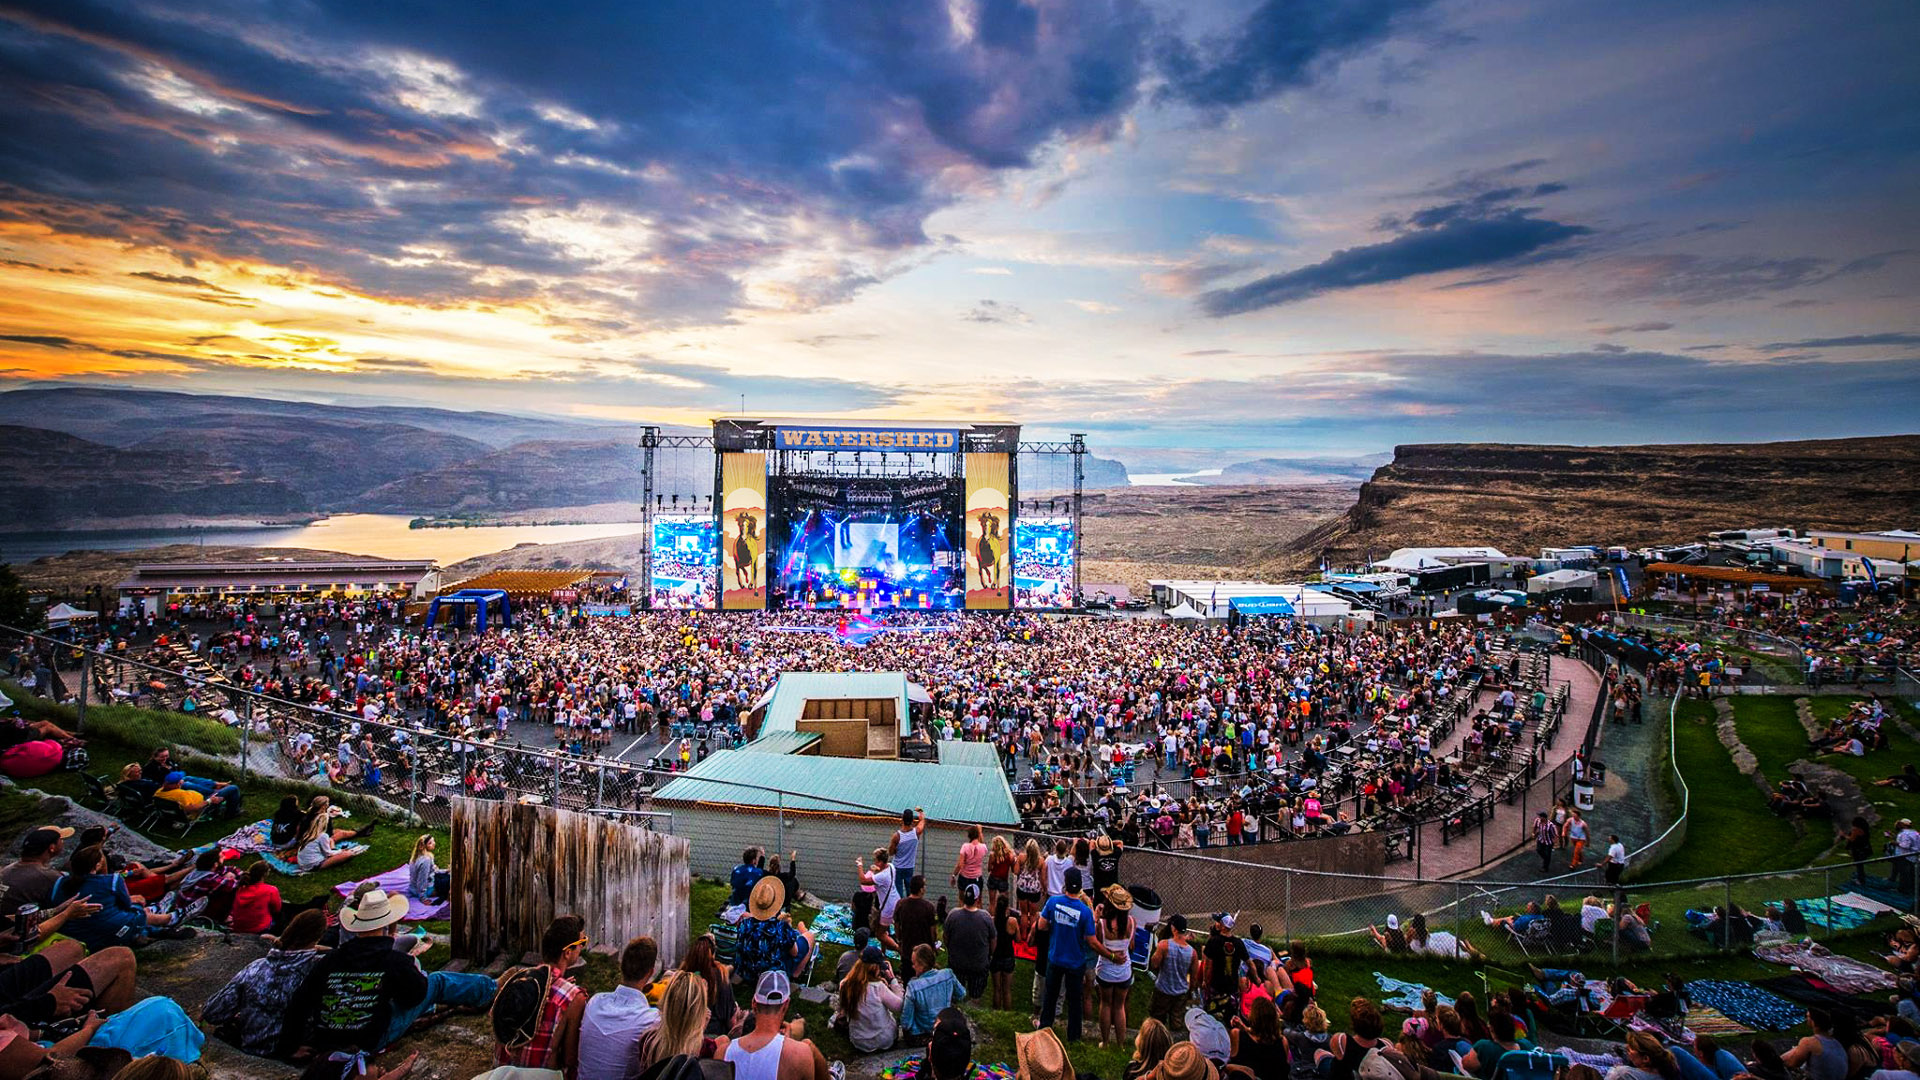 Watershed returns to the lineup announced